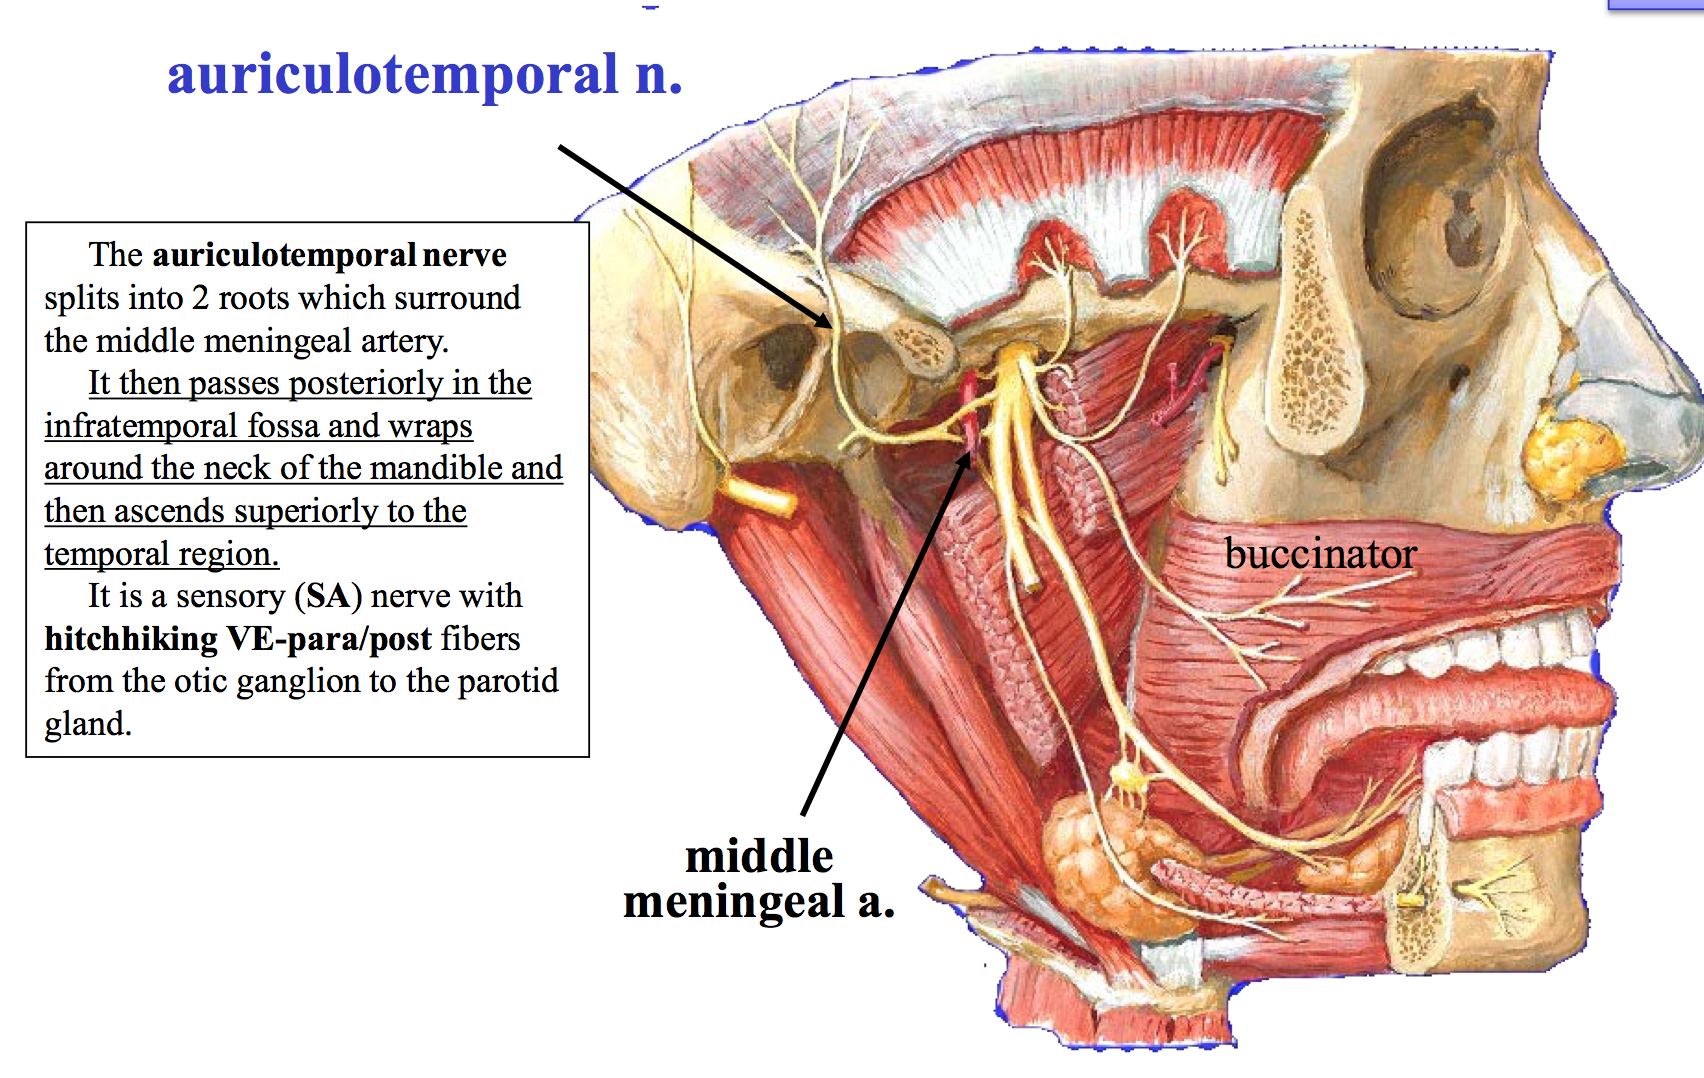 auriculotemporal nerve and middle meningeal artery